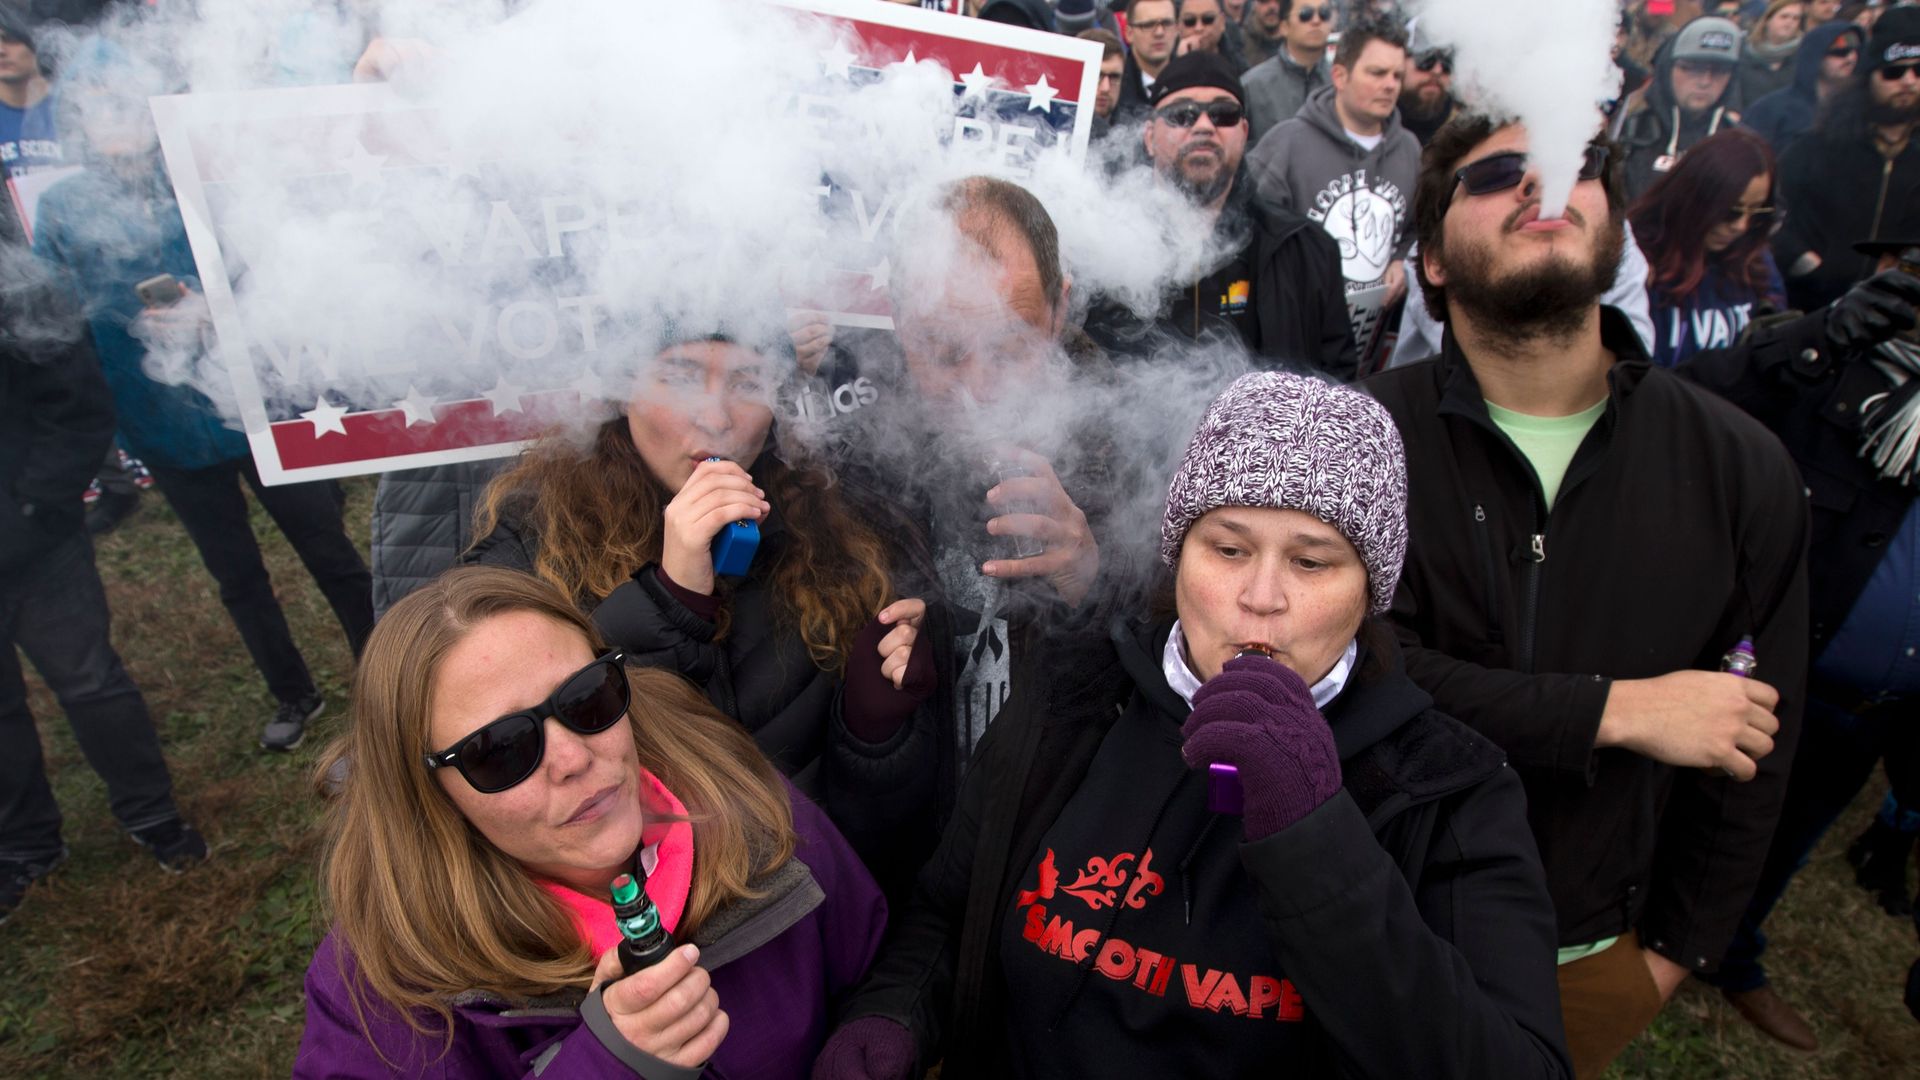 A crowd of protesters vaping outside the White House.